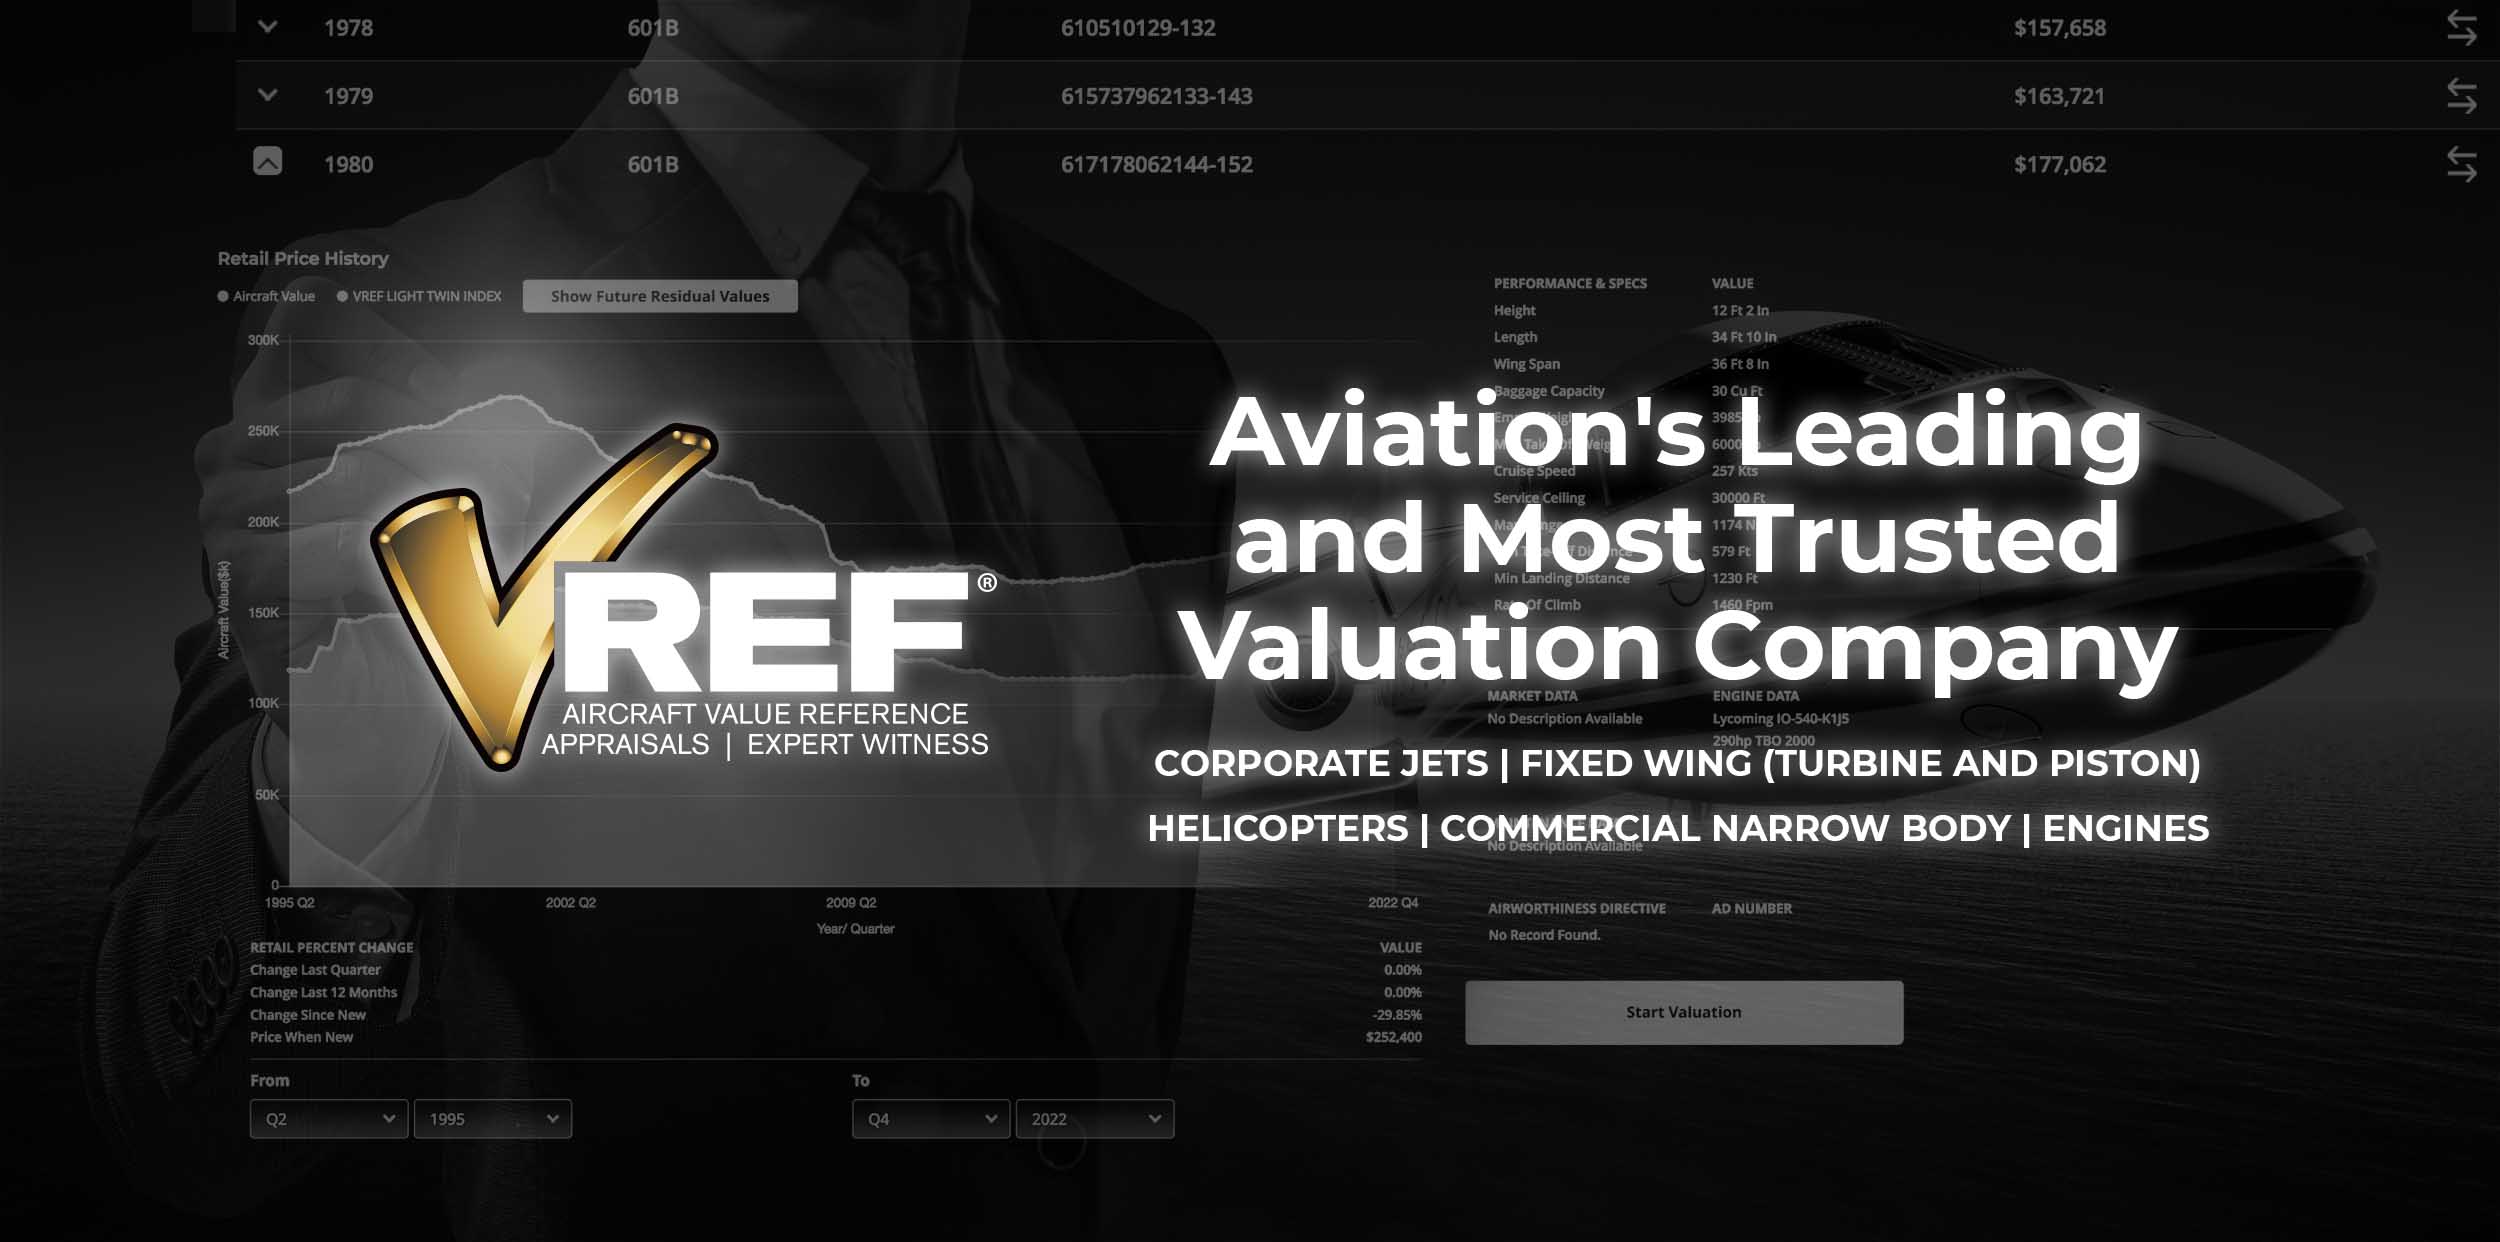 VREF Aircraft Valuation & Appraisal Company